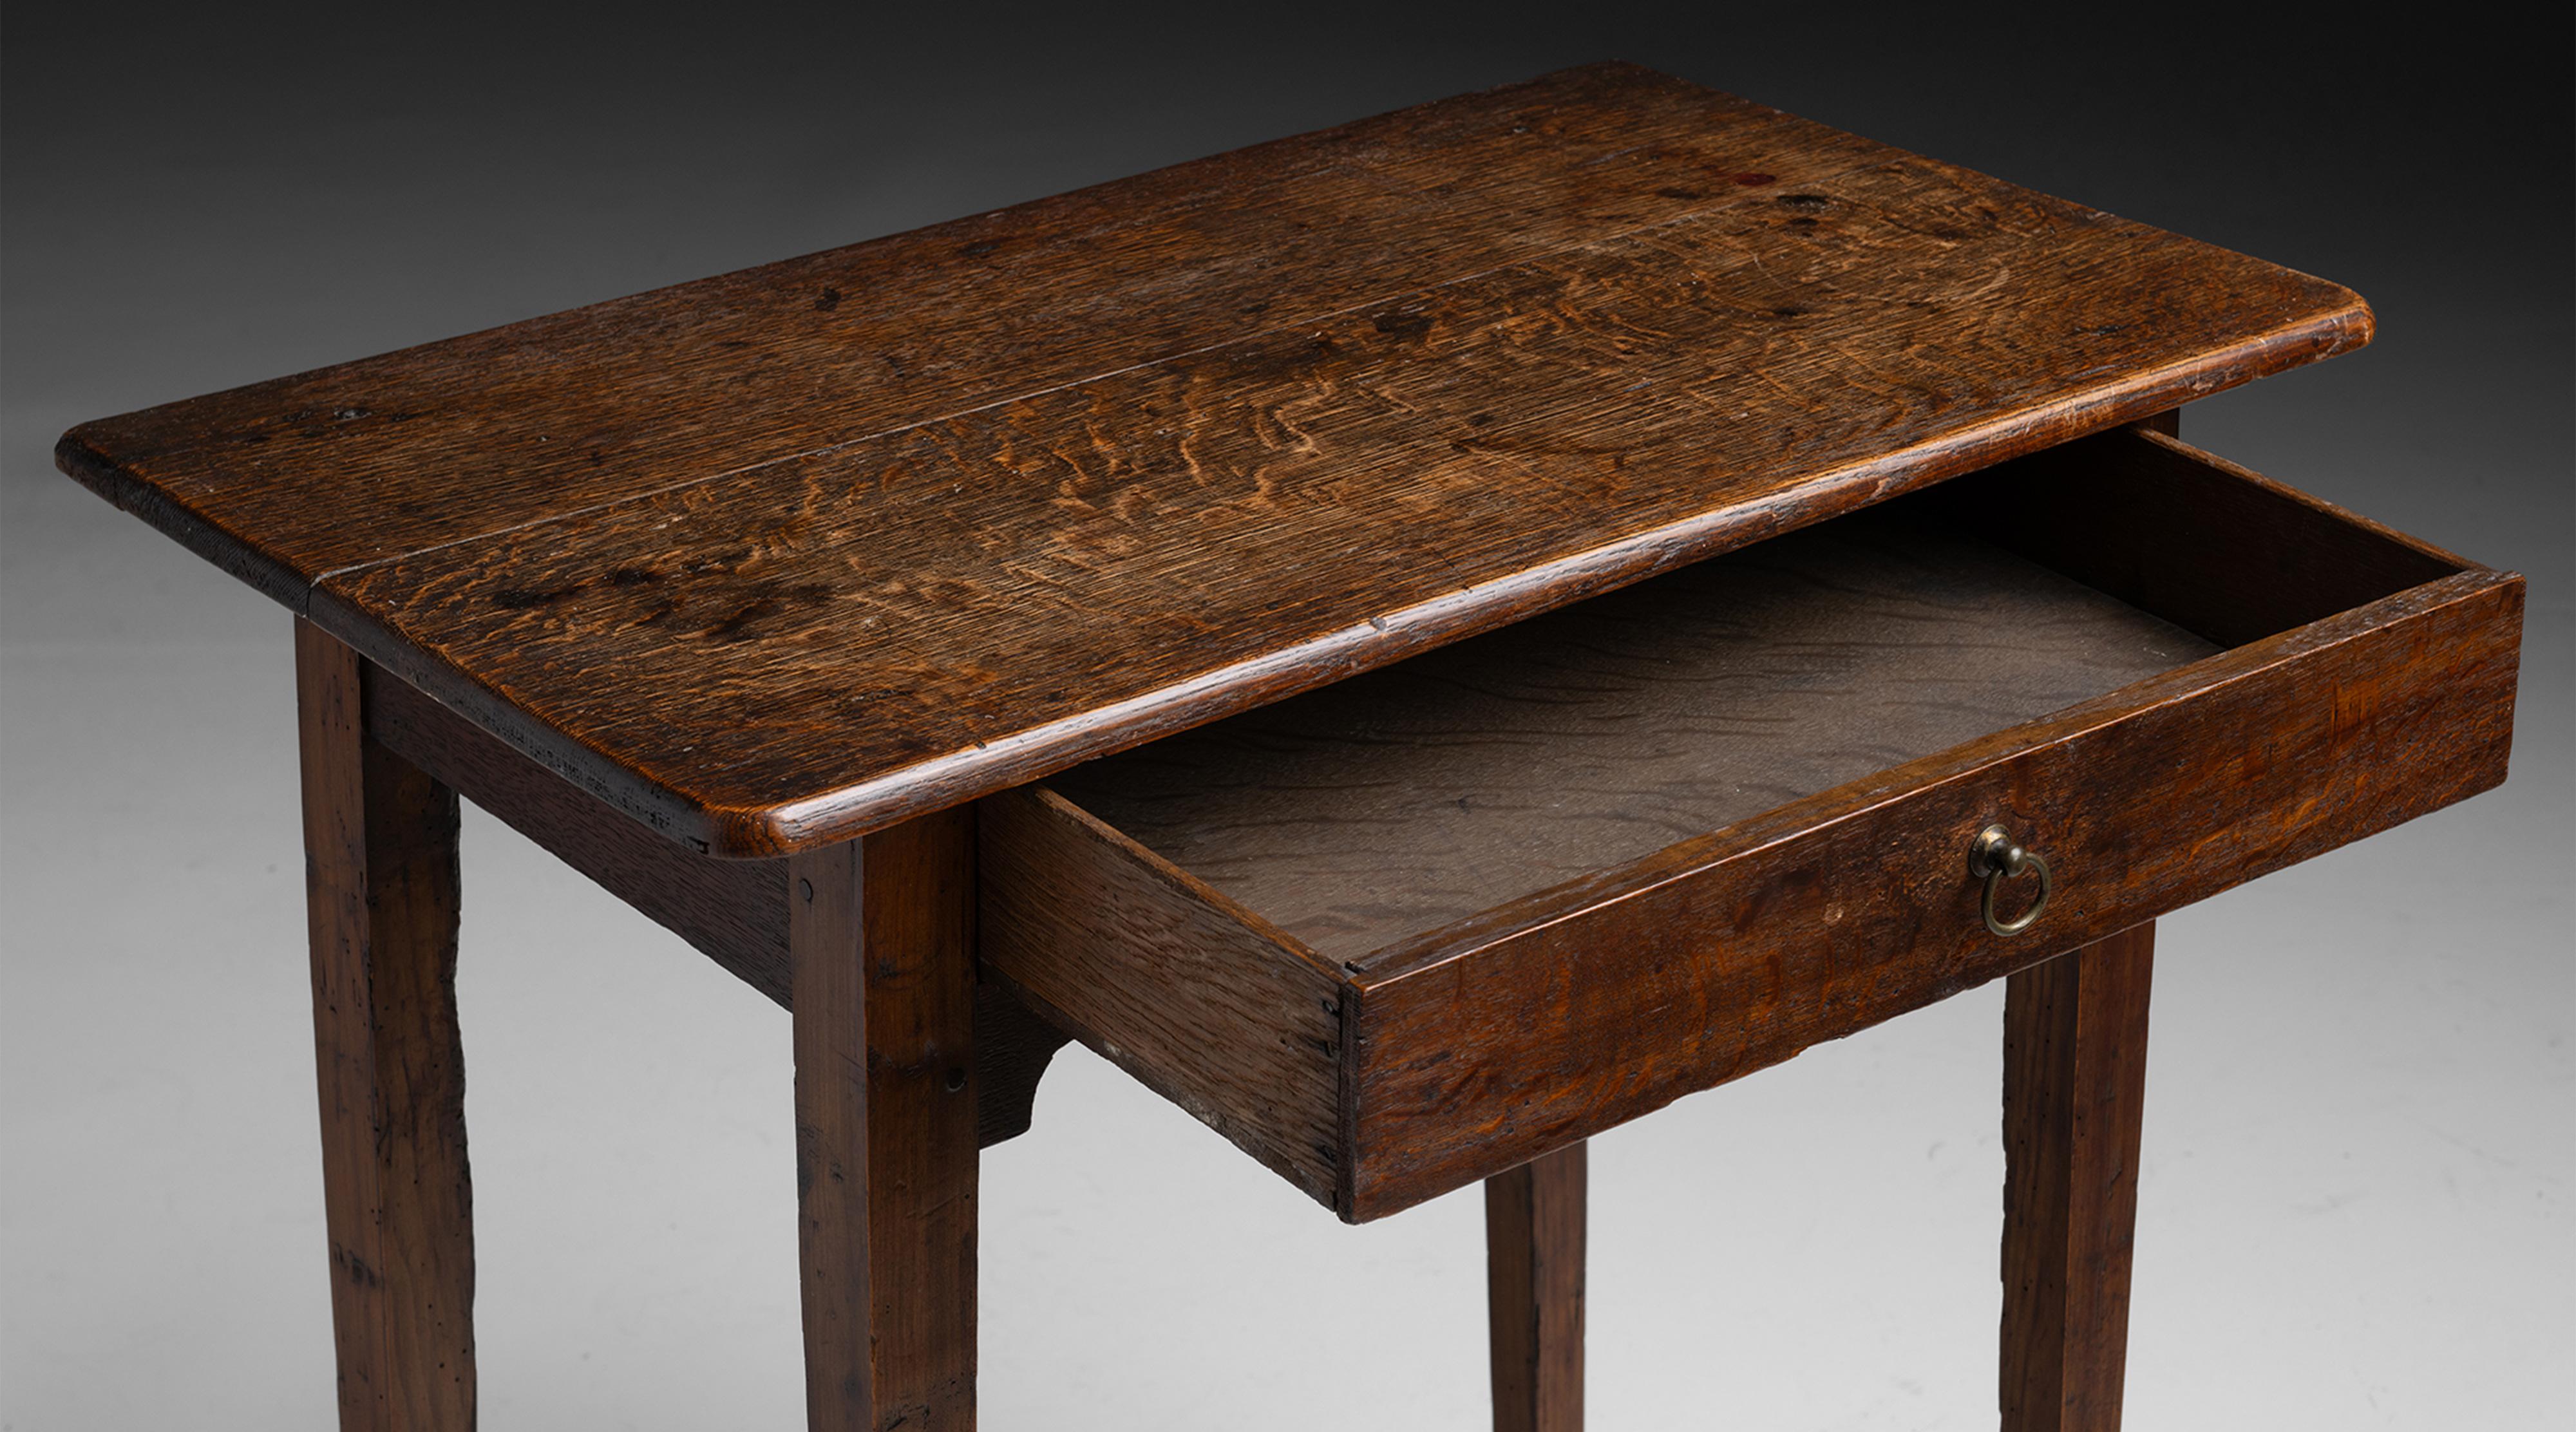 Oak & Fruitwood Side Table

England circa 1900

Finished side table with single drawer and ball feet.

26.75”L x 15.5”d x 27.75”h